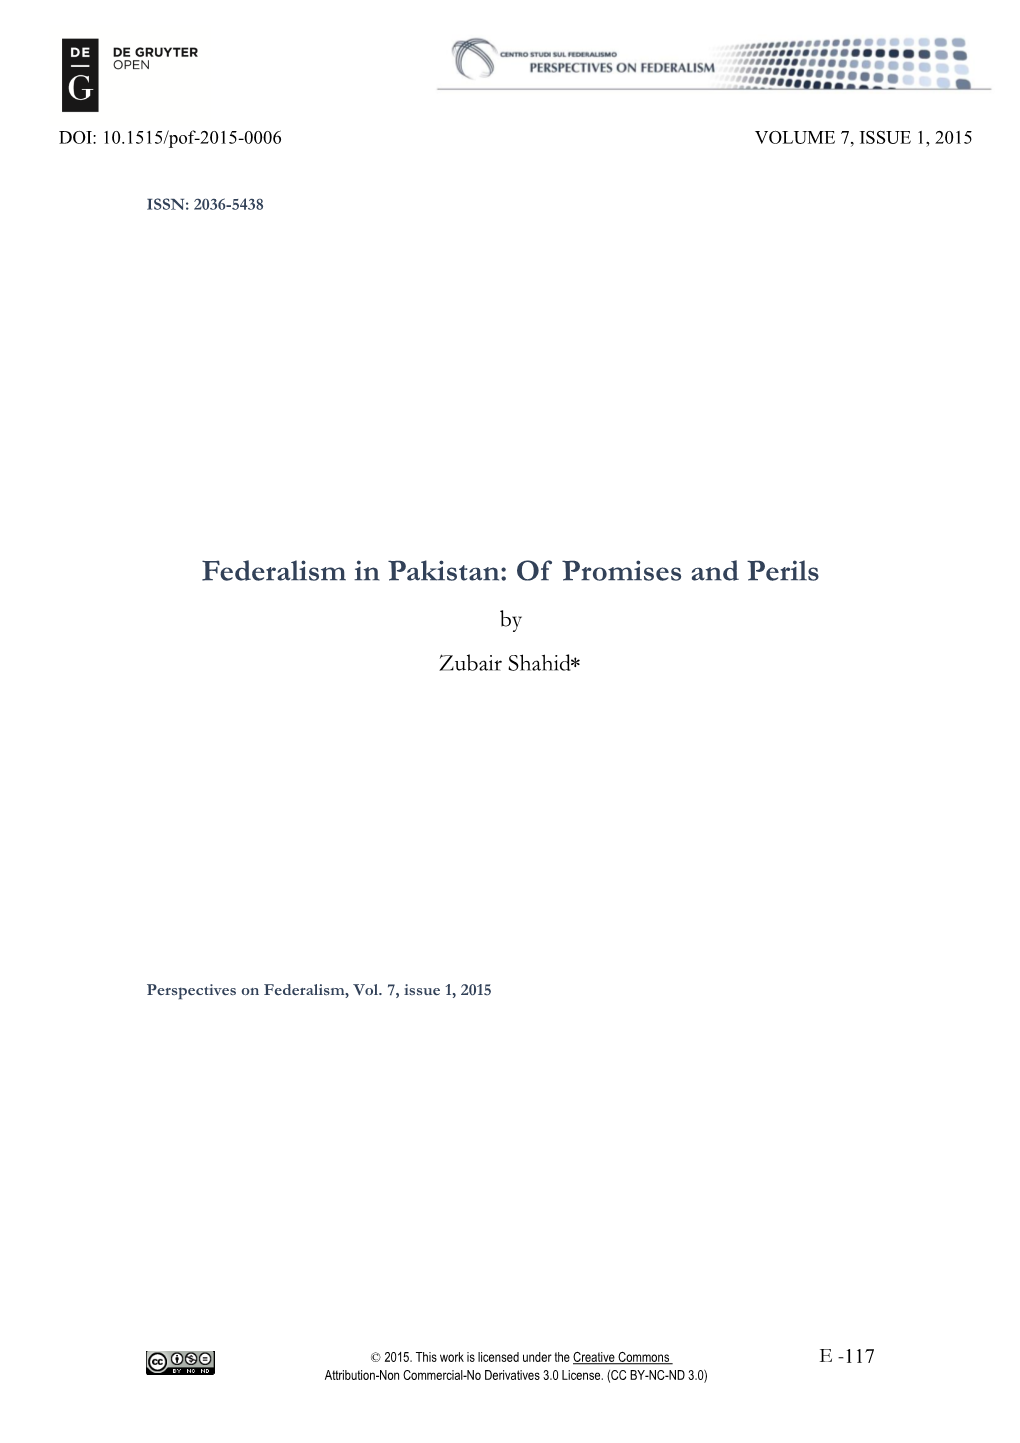 Federalism in Pakistan: of Promises and Perils by Zubair Shahid